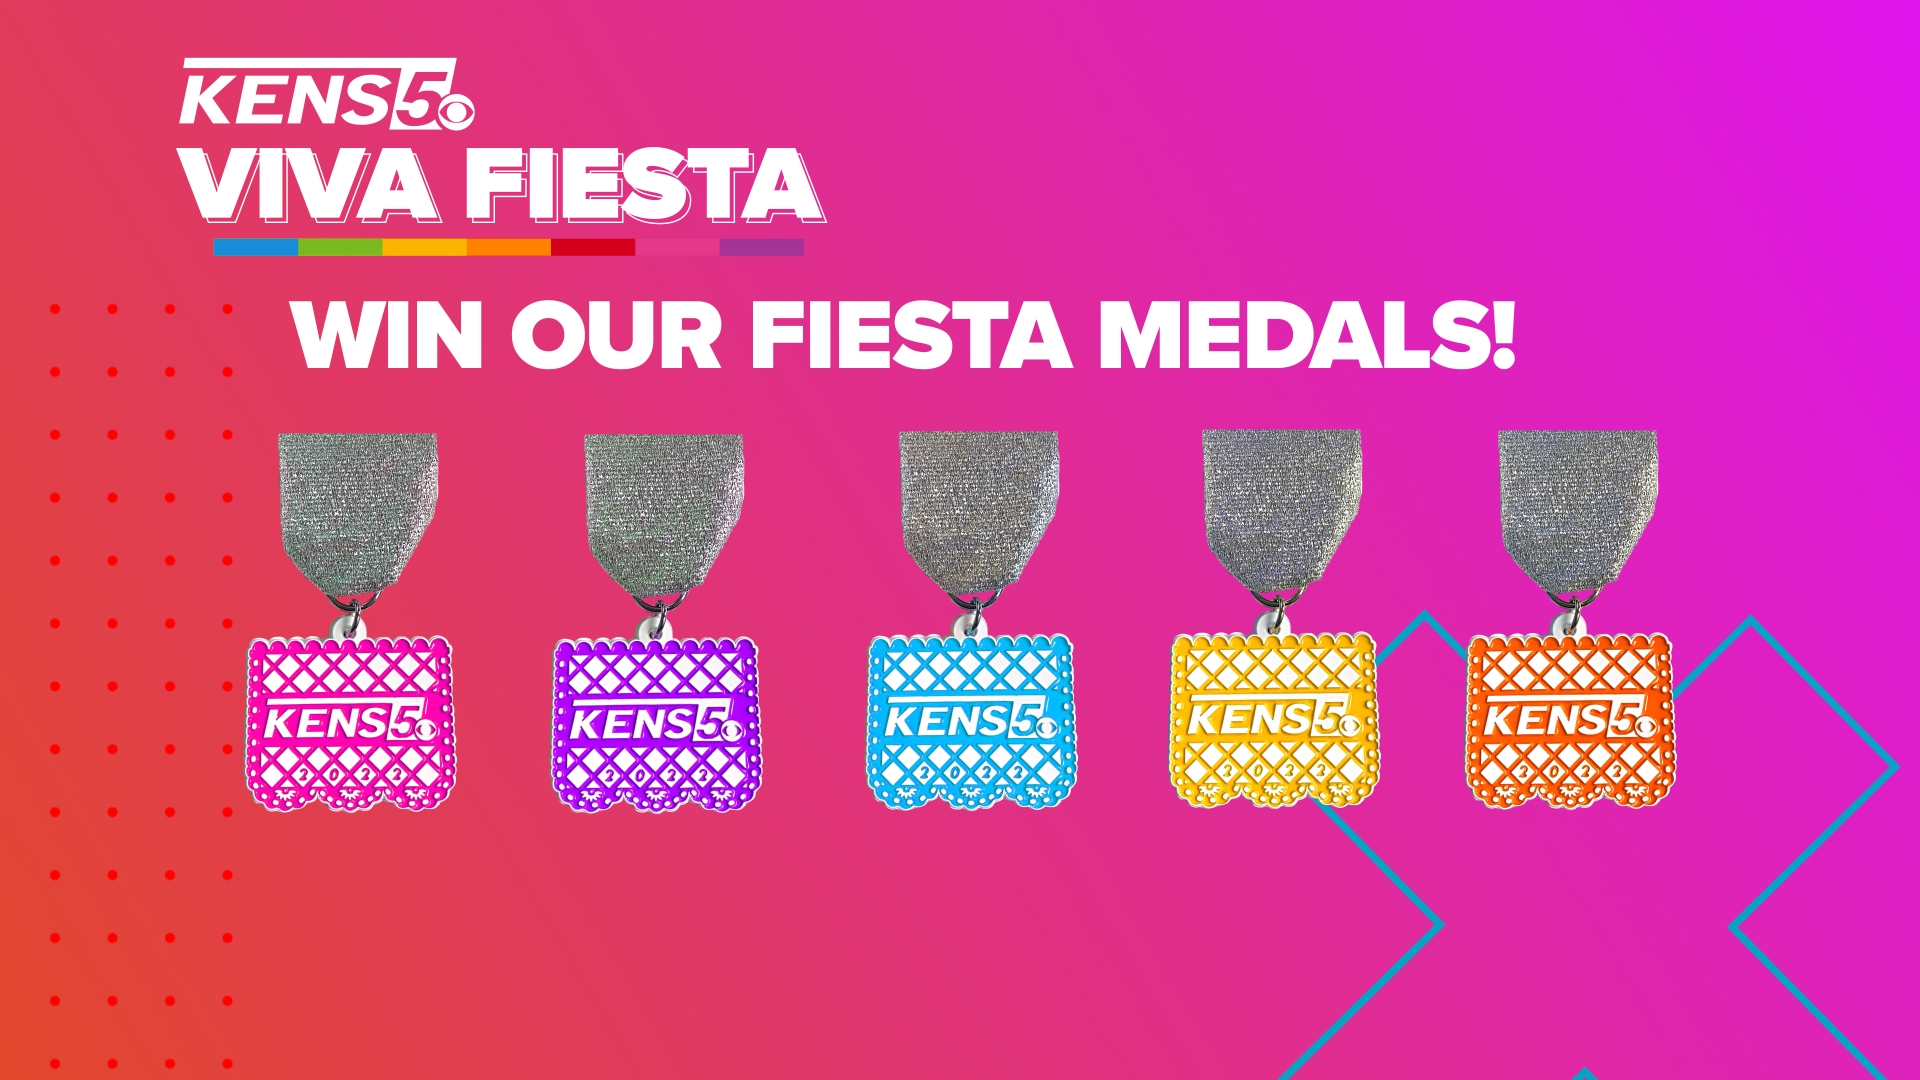 Enter to win a 2022 KENS 5 Fiesta medal!